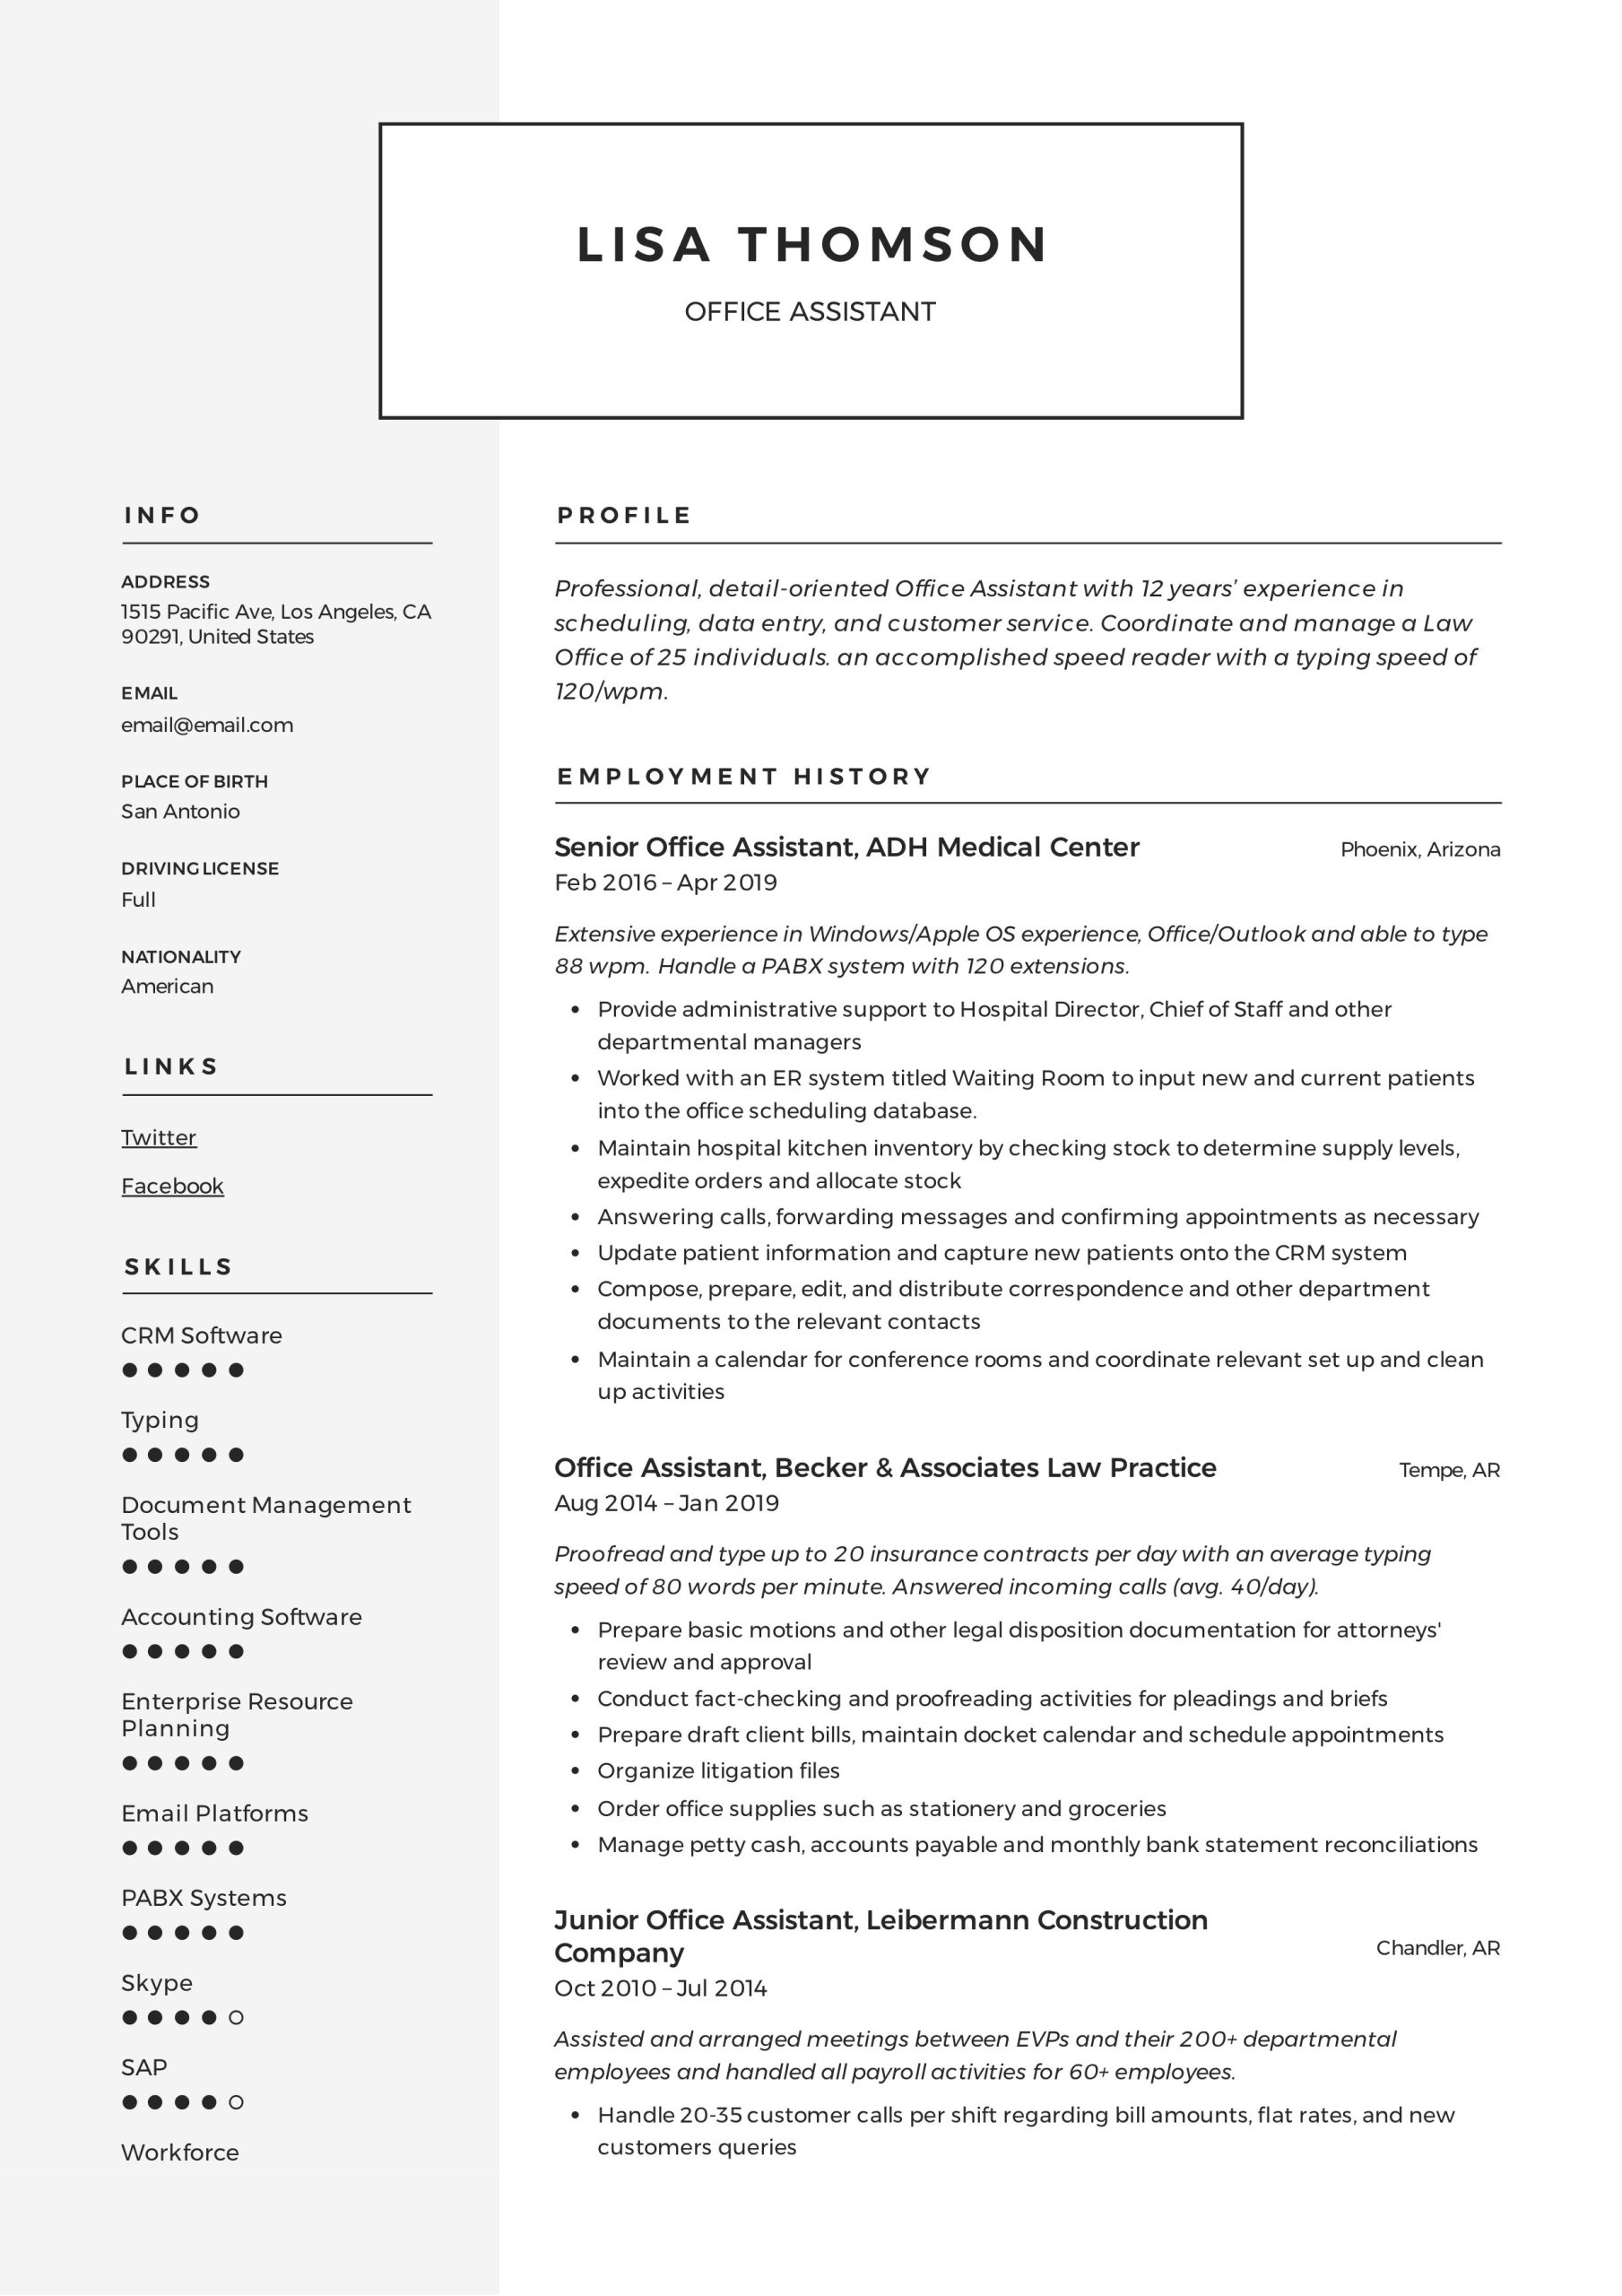 Sample Resume for Bank Back Office Executive Office assistant Resume   Writing Guide 12 Resume Templates 2020